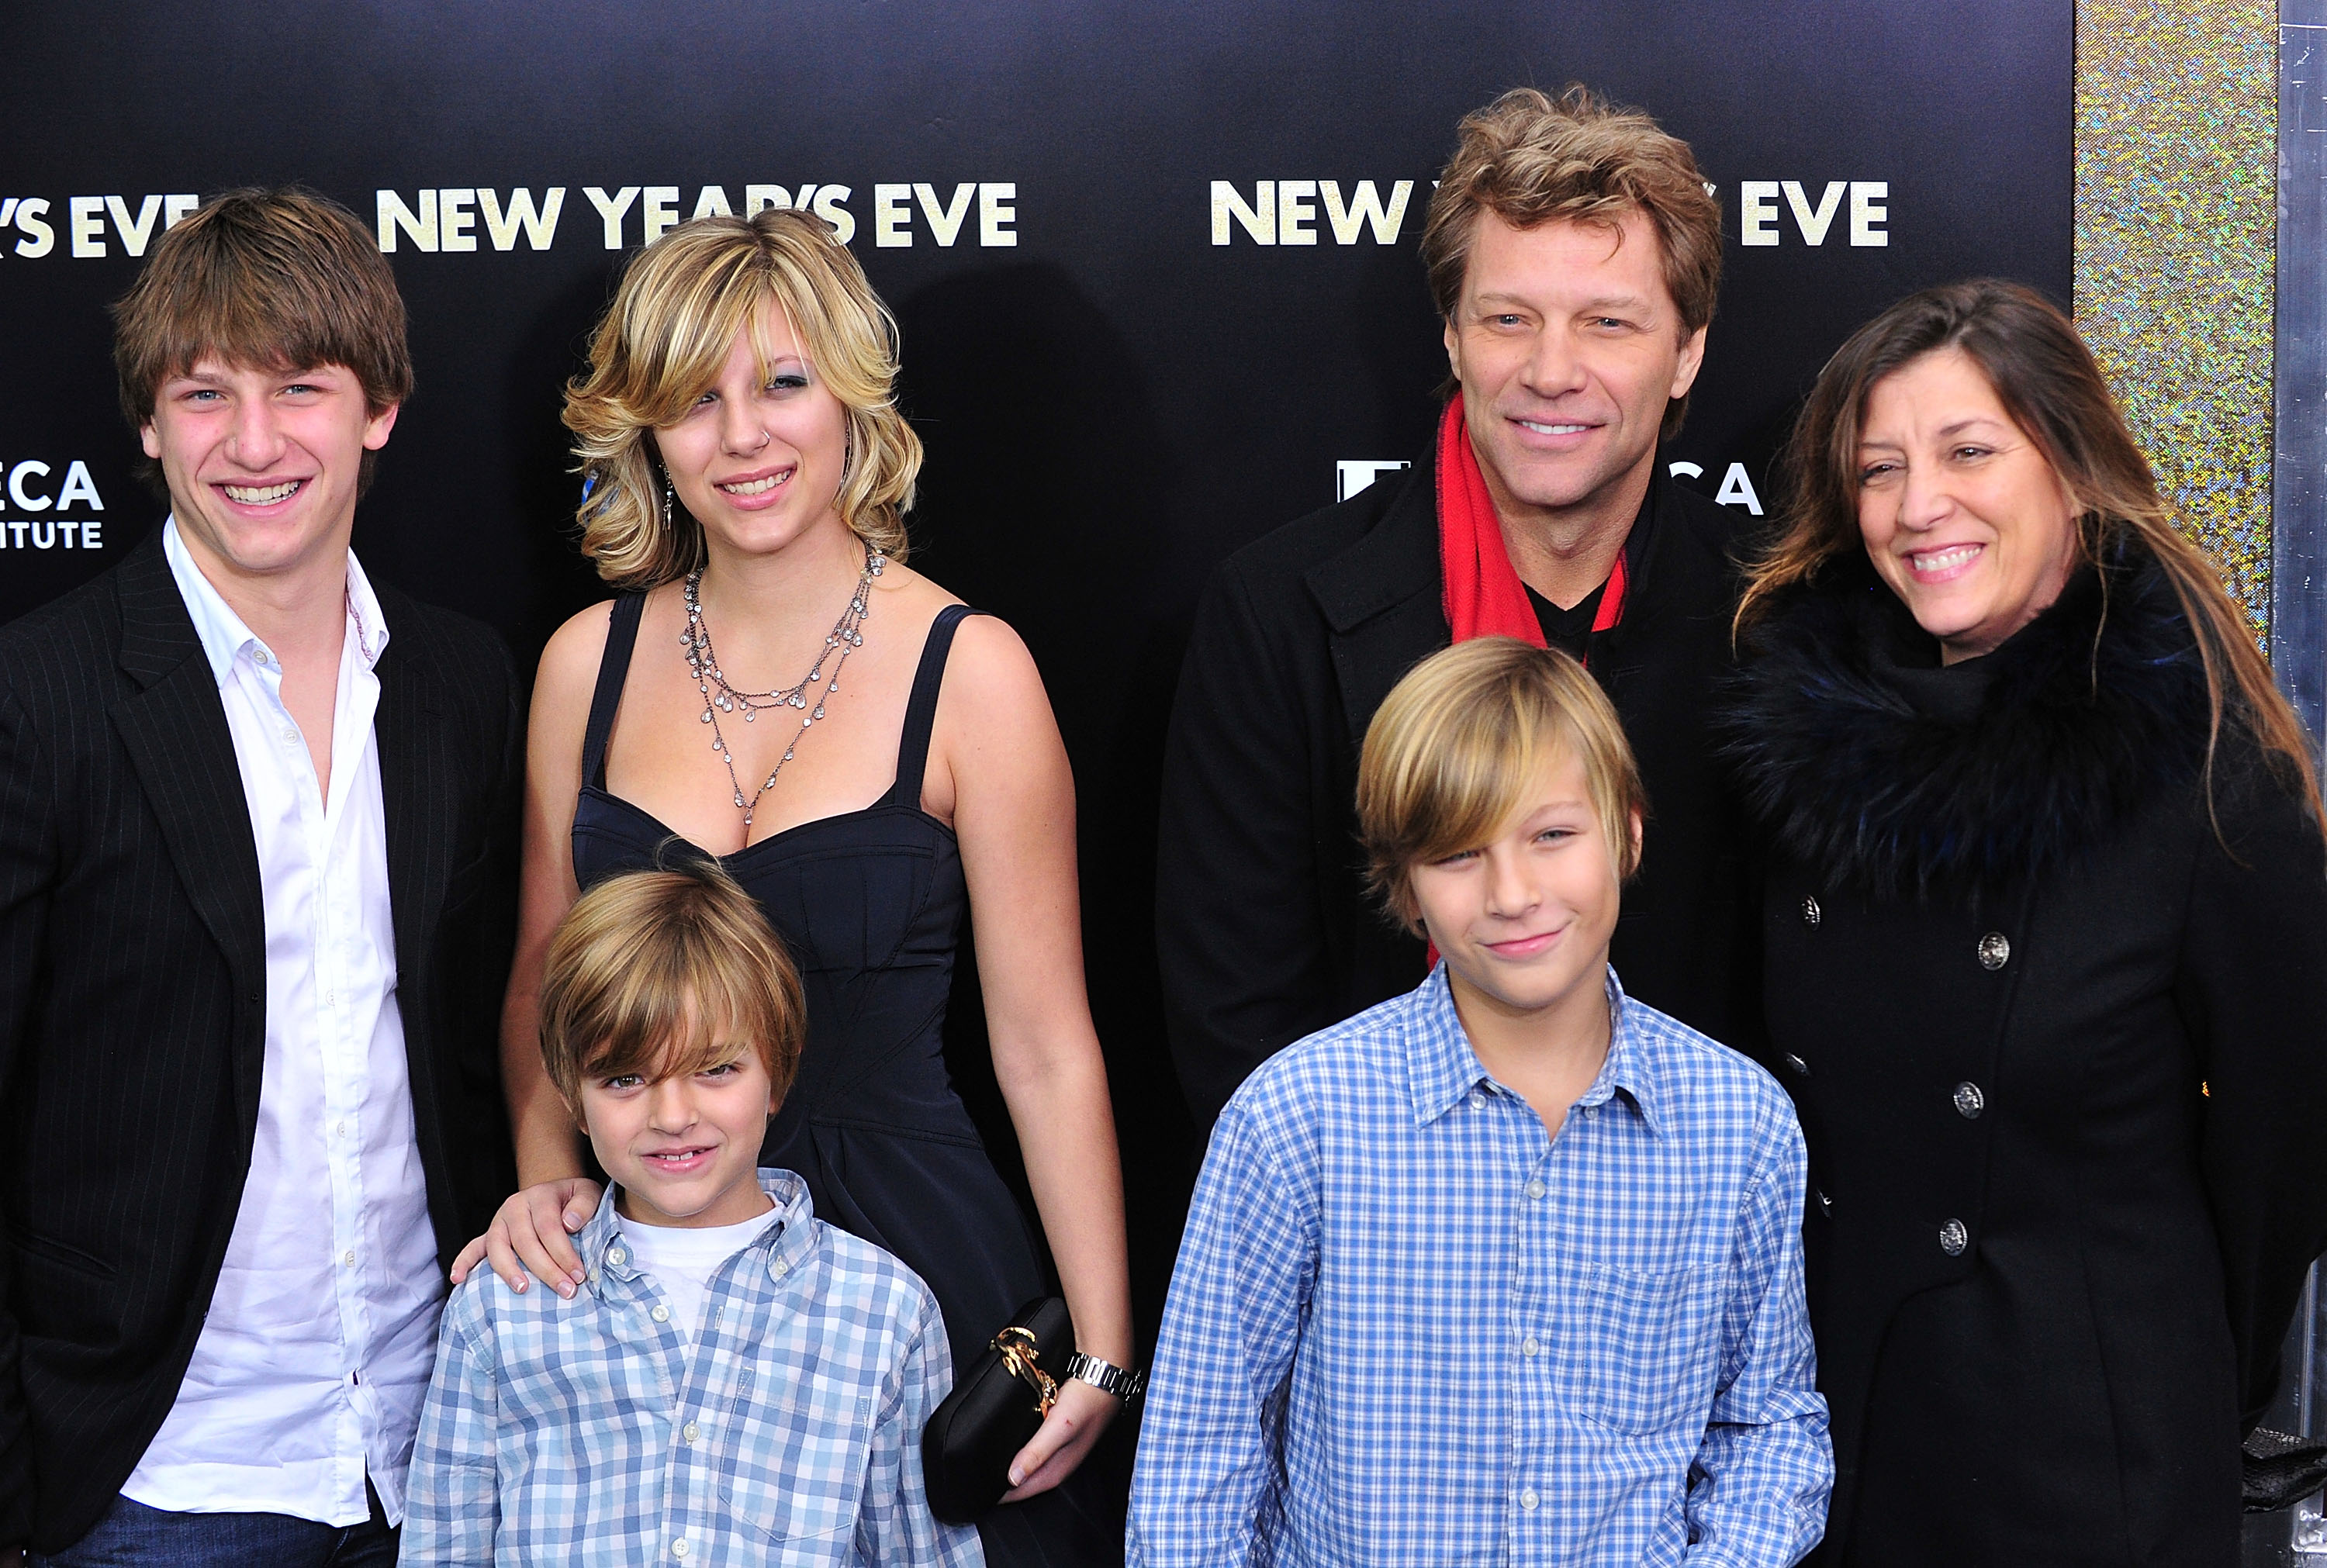 Jesse, Stephanie Rose, Romeo (front left), Jon Bon Jovi, Jacob Hurley (front right), and Dorothea Bongiovi attend the "New Year's Eve" premiere in New York City on December 7, 2011. | Source: Getty Images